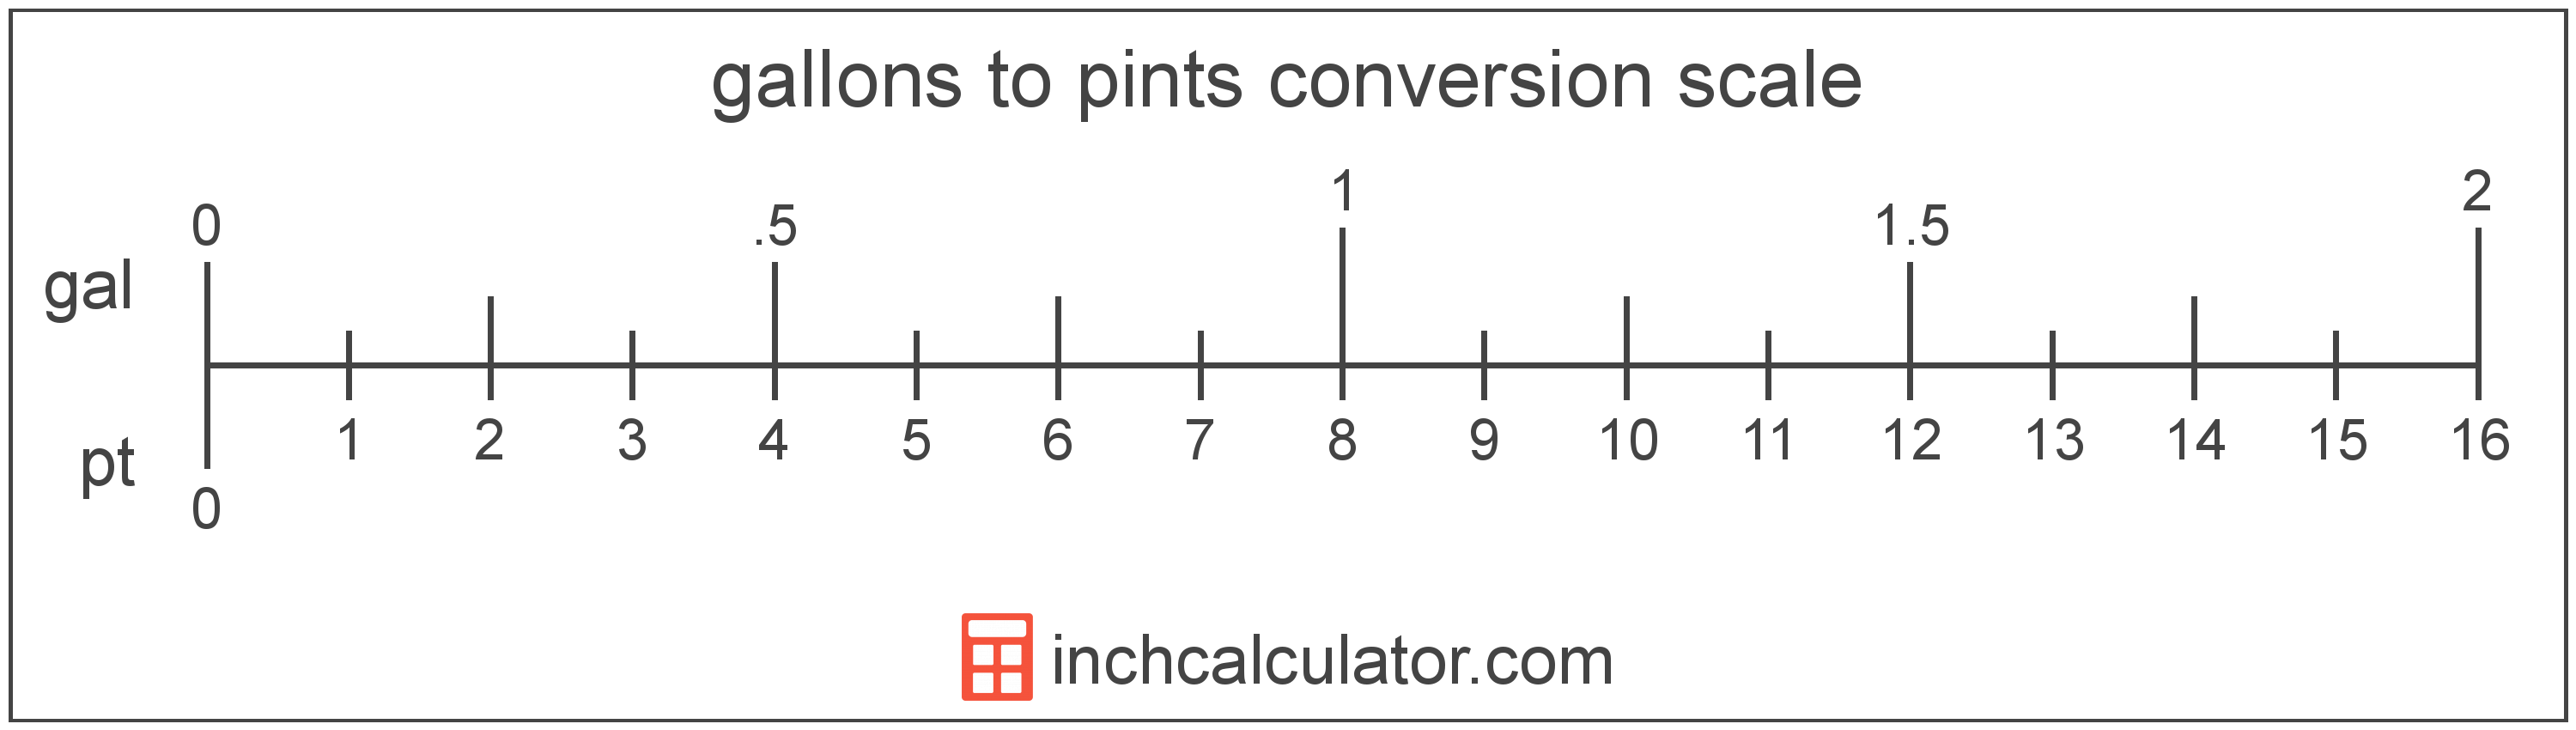 conversion scale showing gallons and equivalent pints volume values